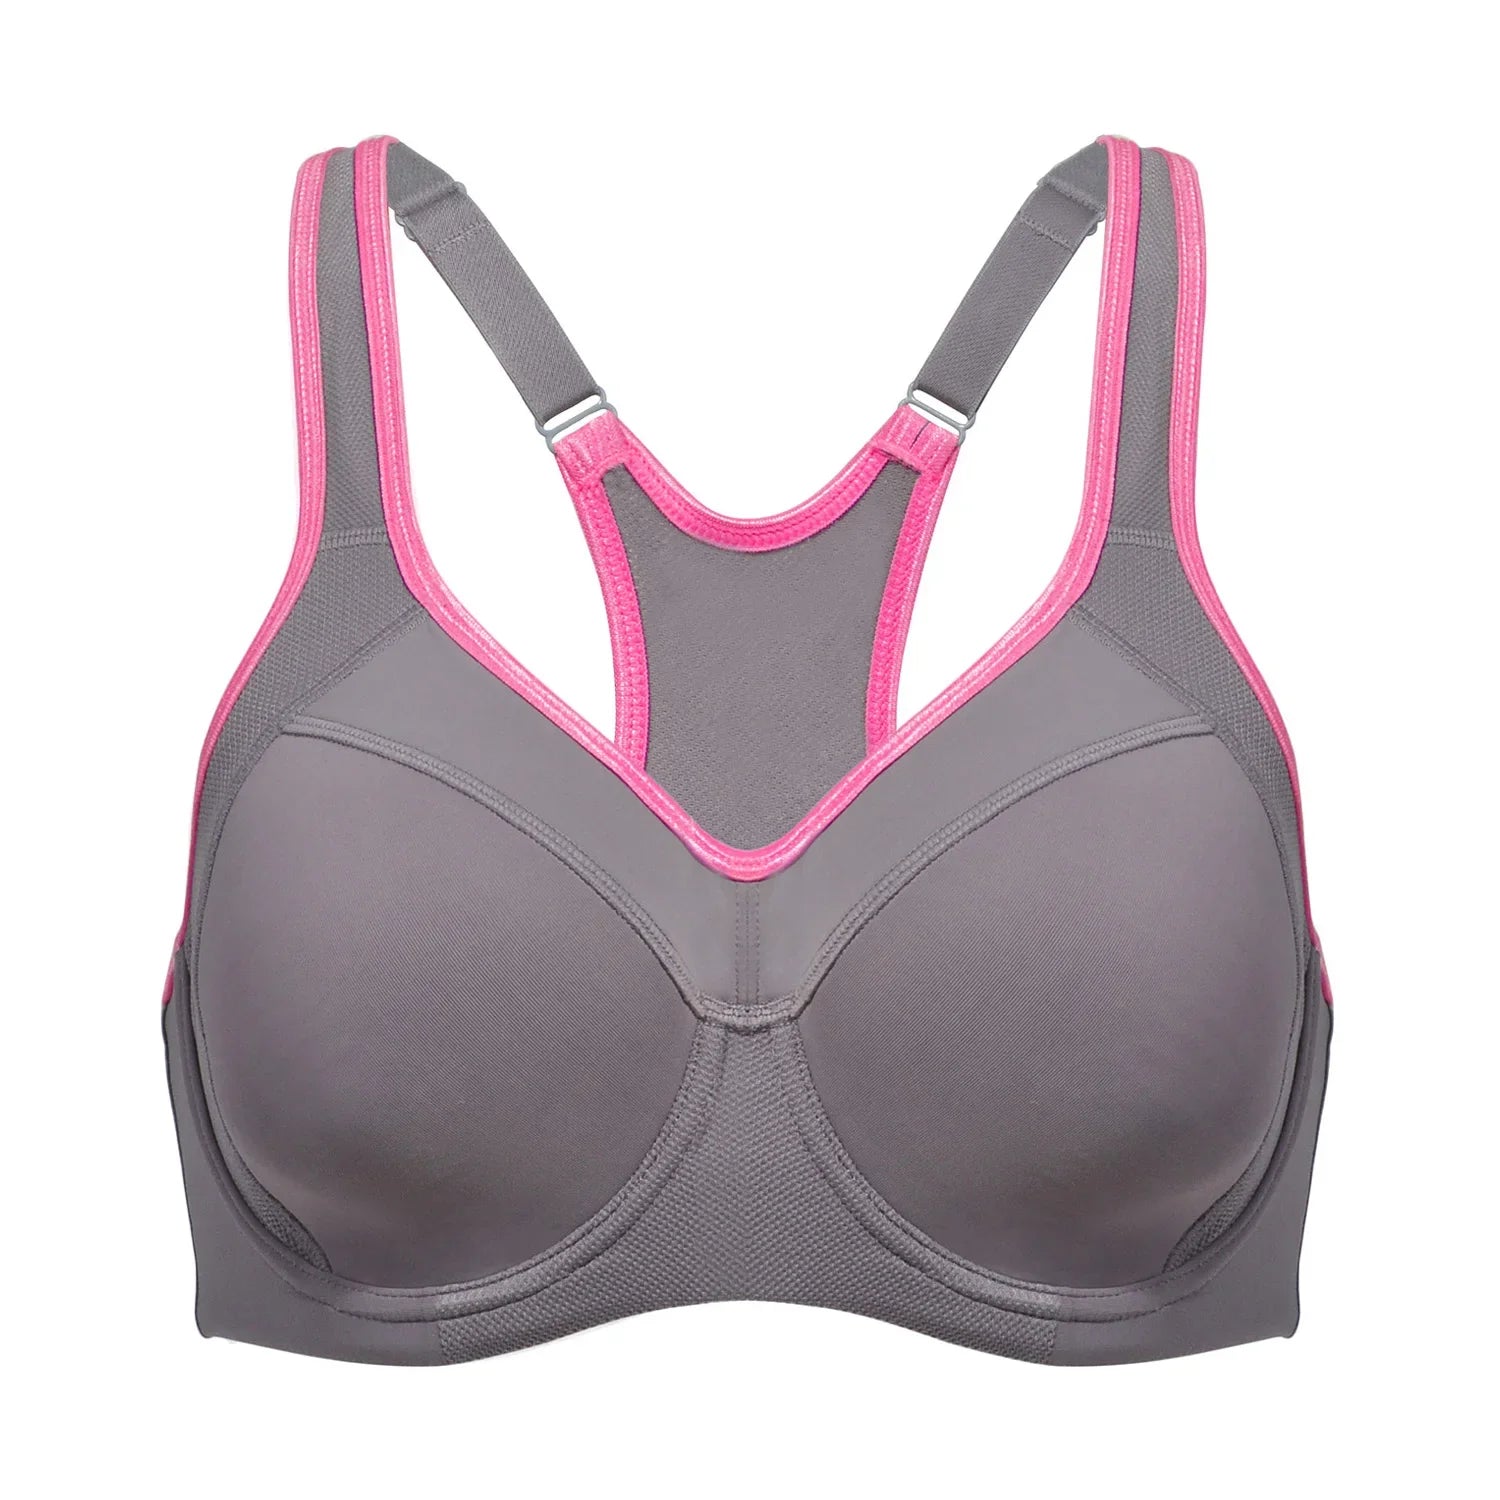 Canmol High Impact Racerback Push Up Sports Bra for Women Full Support